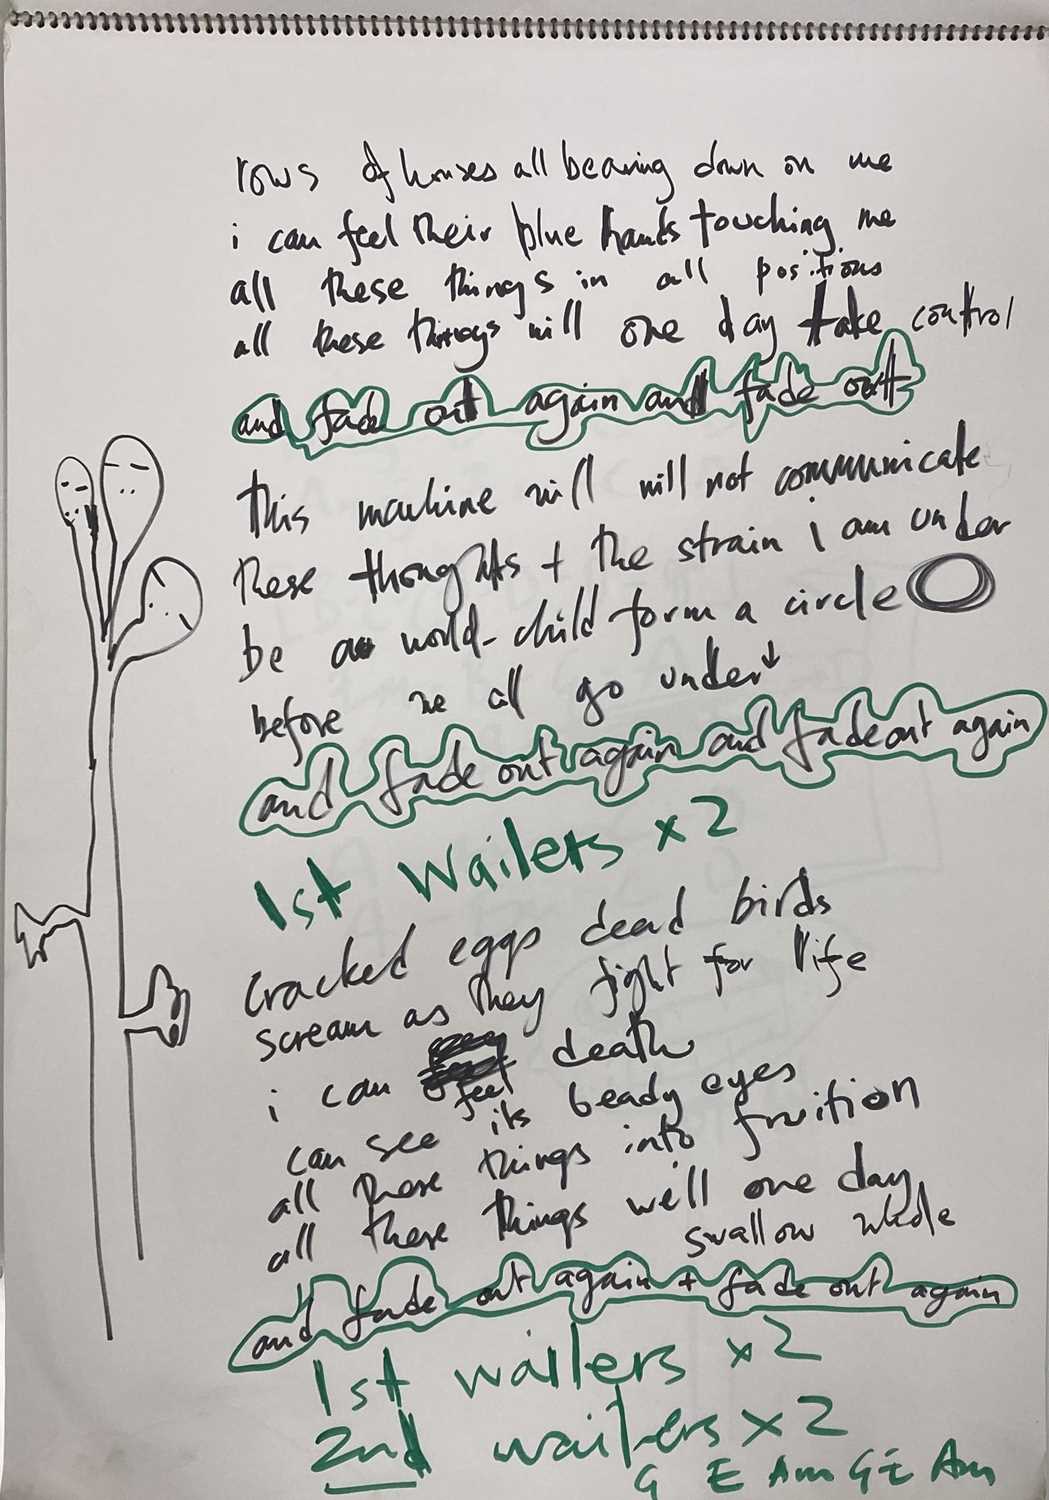 Lot 461 - RADIOHEAD A2 SKETCHBOOK WITH WORKINGS AND LYRICS FROM THEIR REHEARSAL FOR "THE BENDS" IN JANUARY 1994